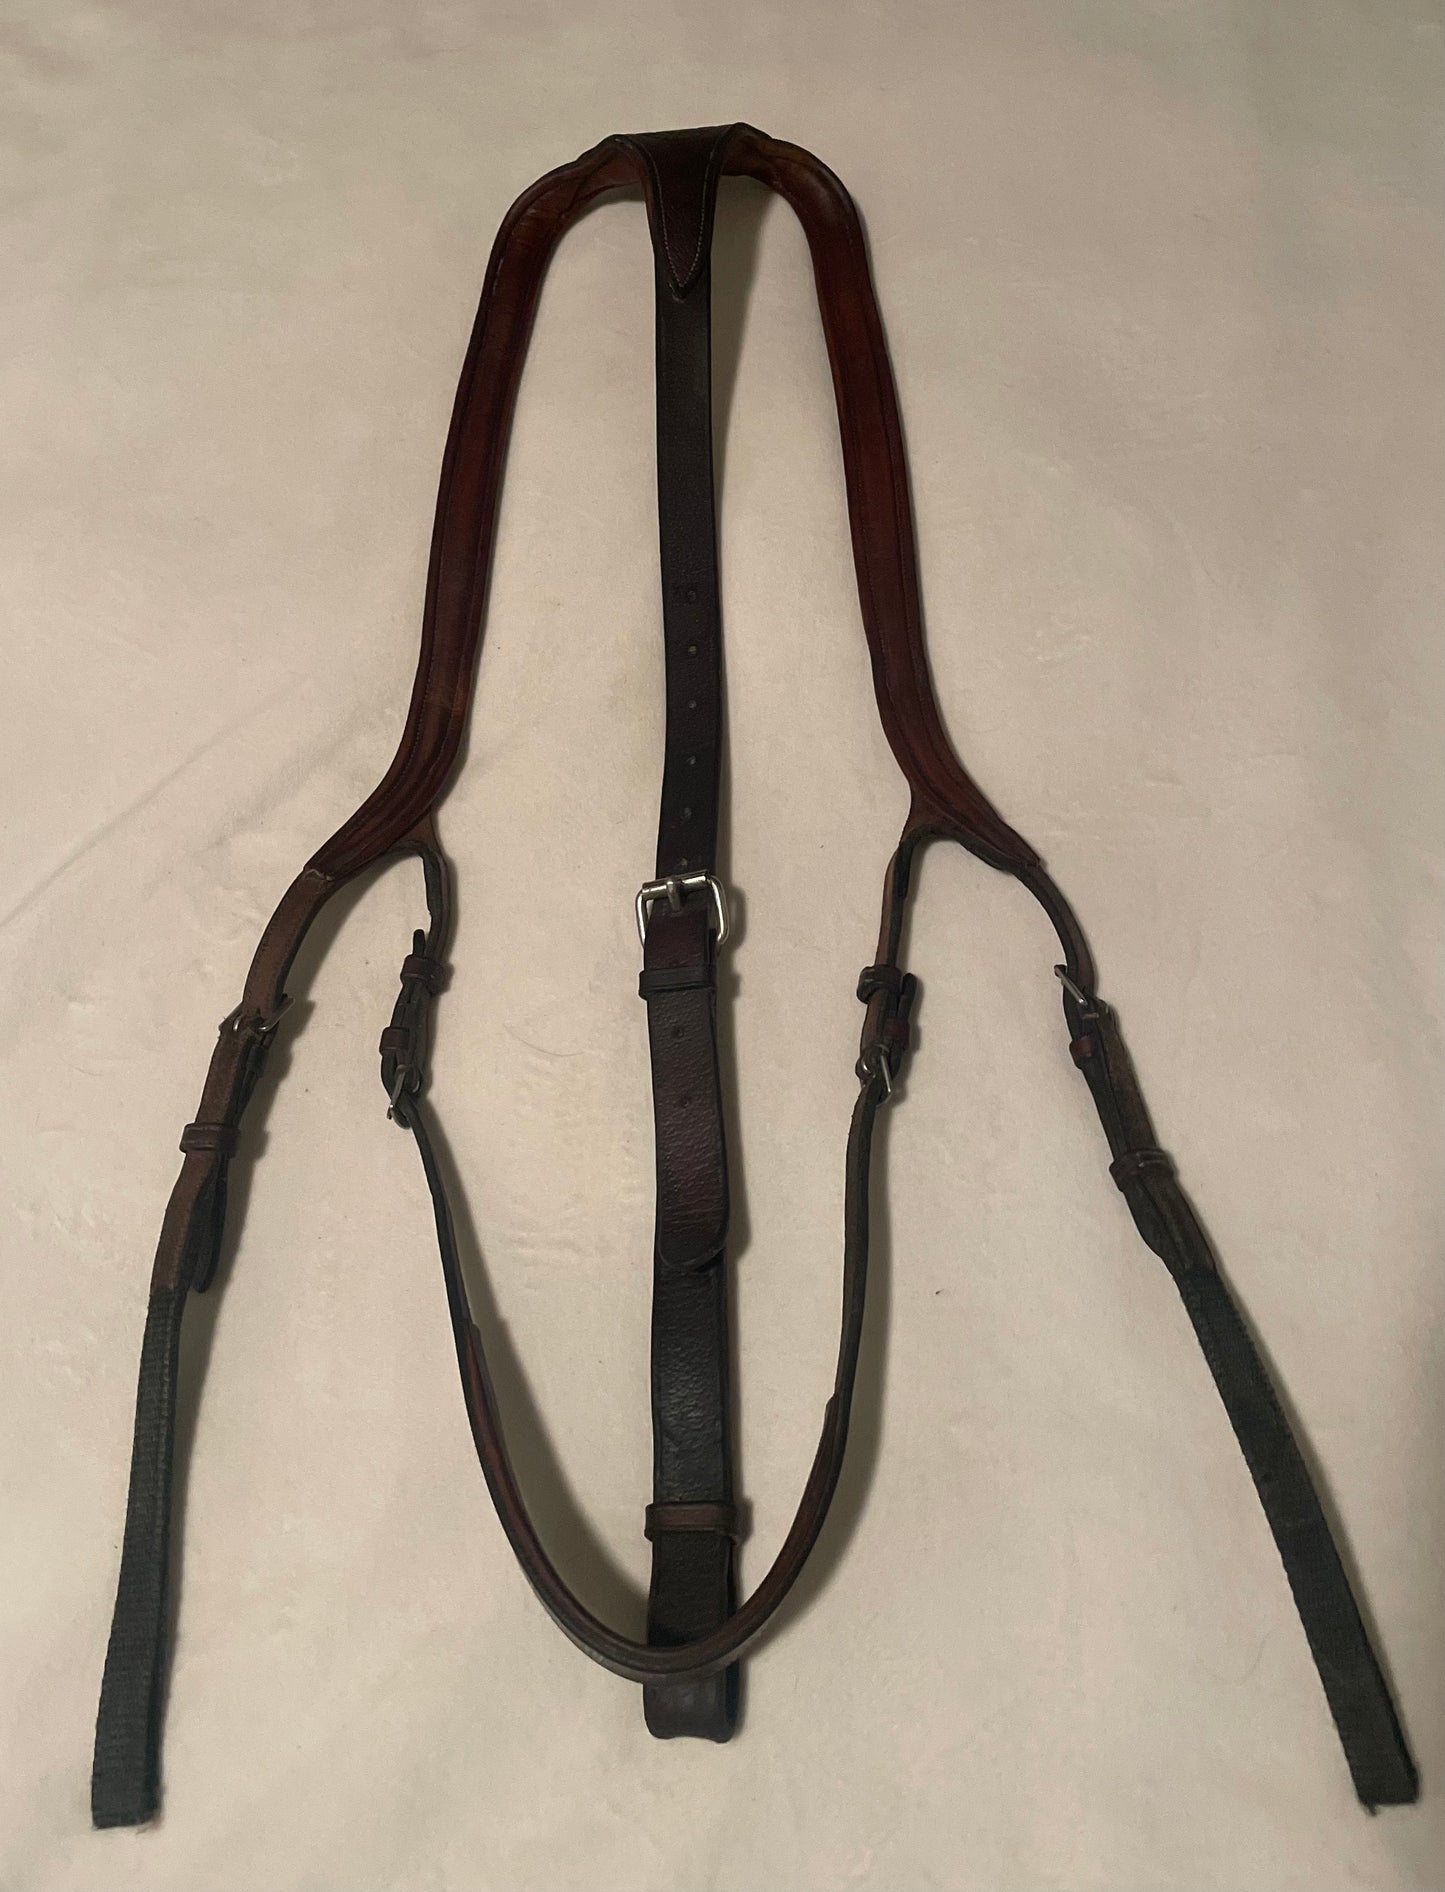 Butet Hunting Breastplate with Adjustable Bridge (Running Attachment not Included)